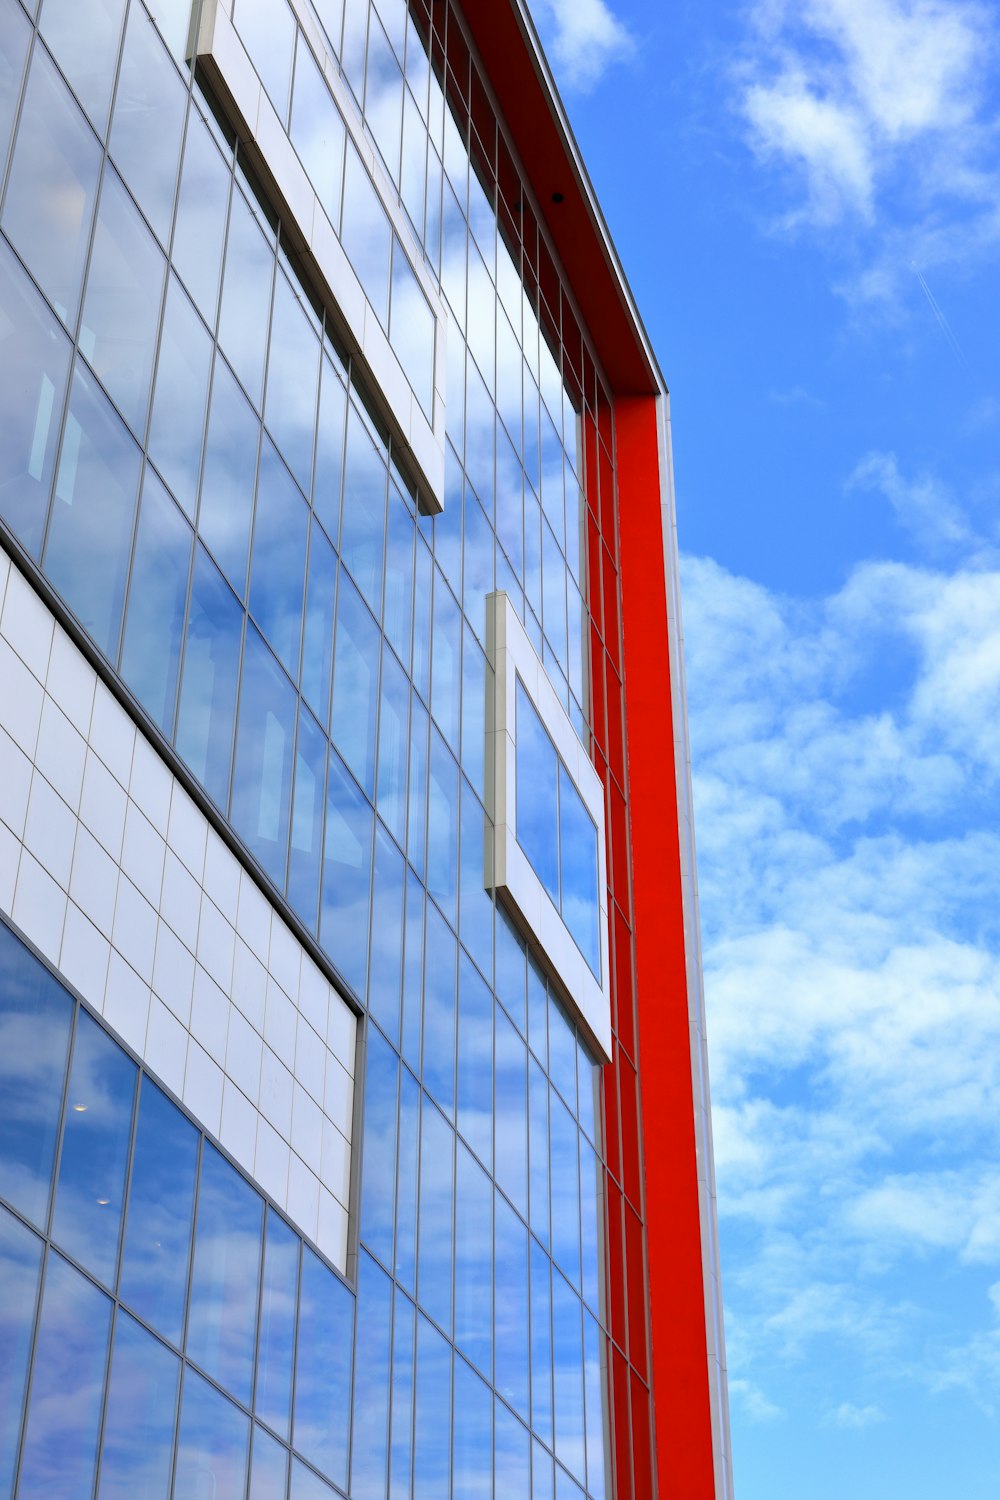 red and white building under blue sky during daytime